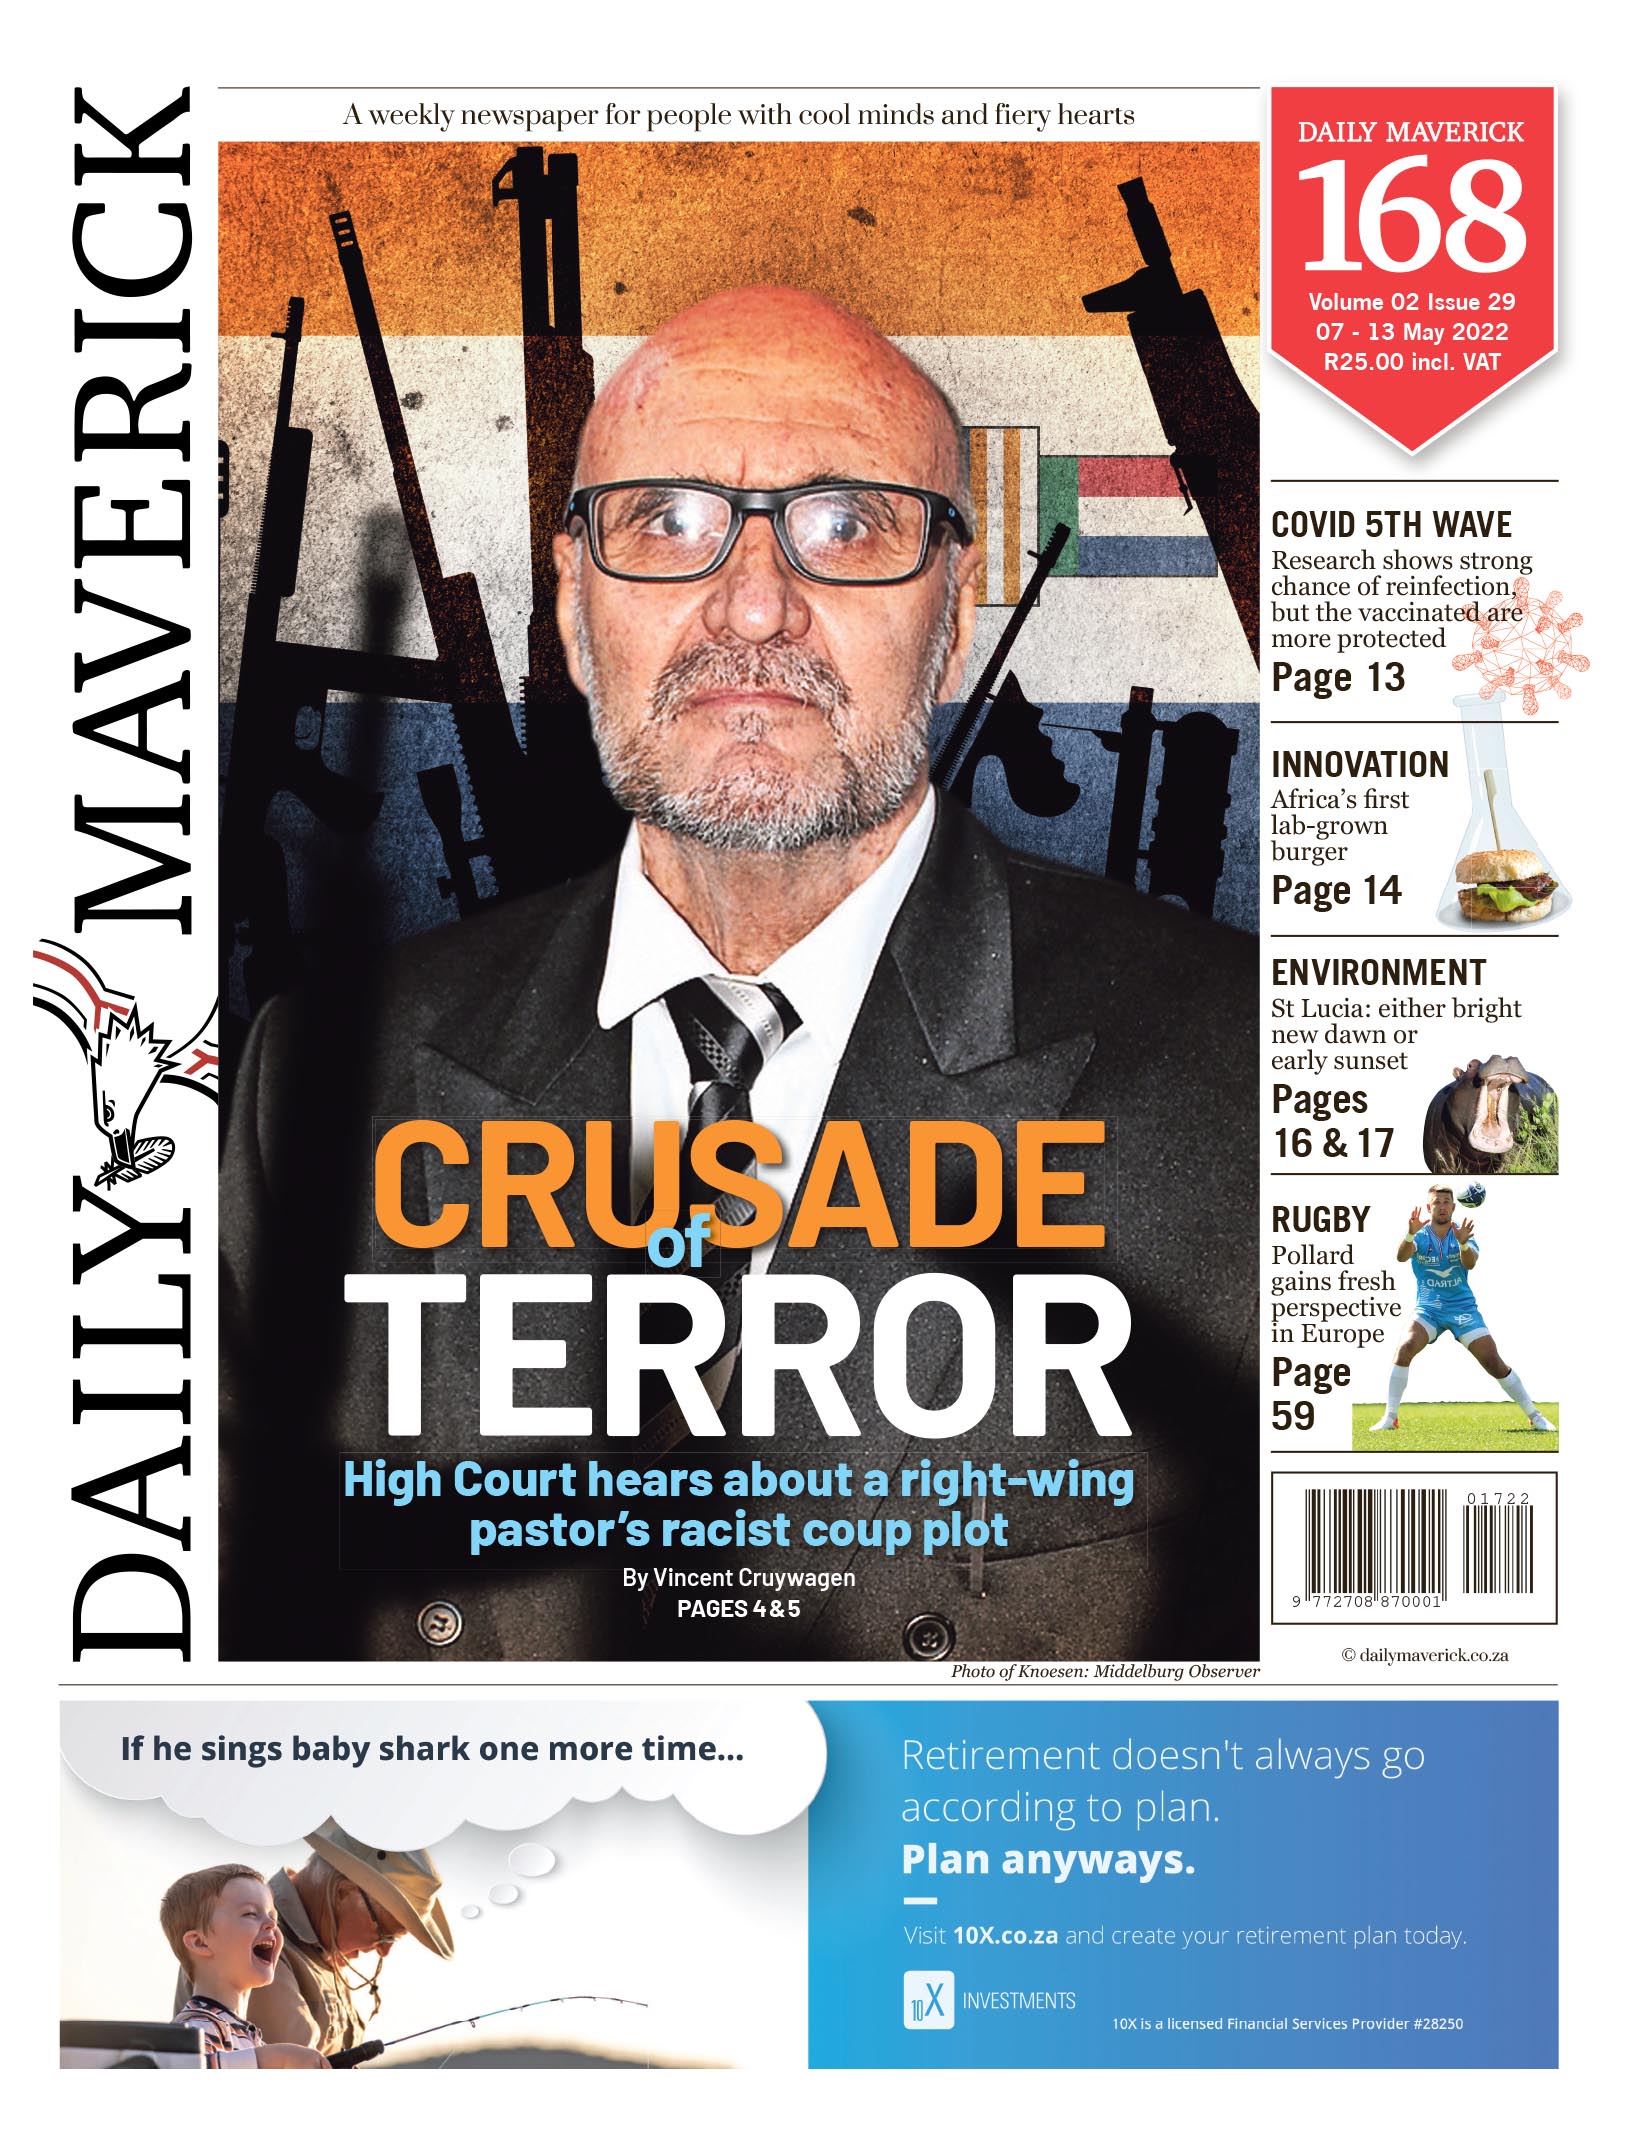 An image of the front page of the latest edition of Daily Maverick's DM186